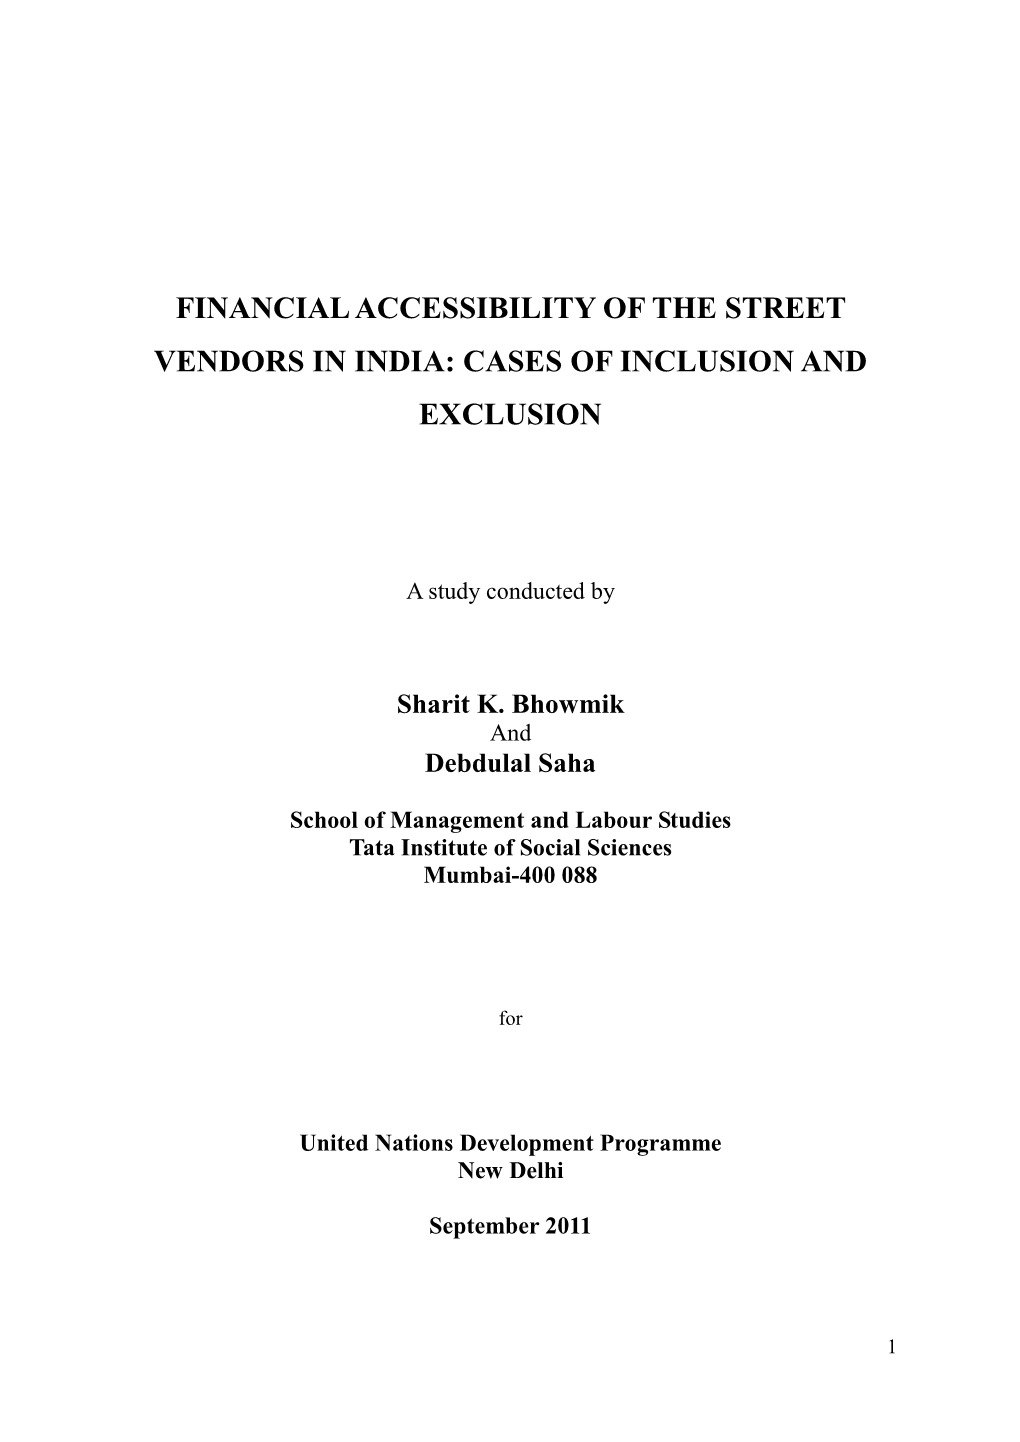 Financial Accessibility of the Street Vendors in India: Cases of Inclusion and Exclusion